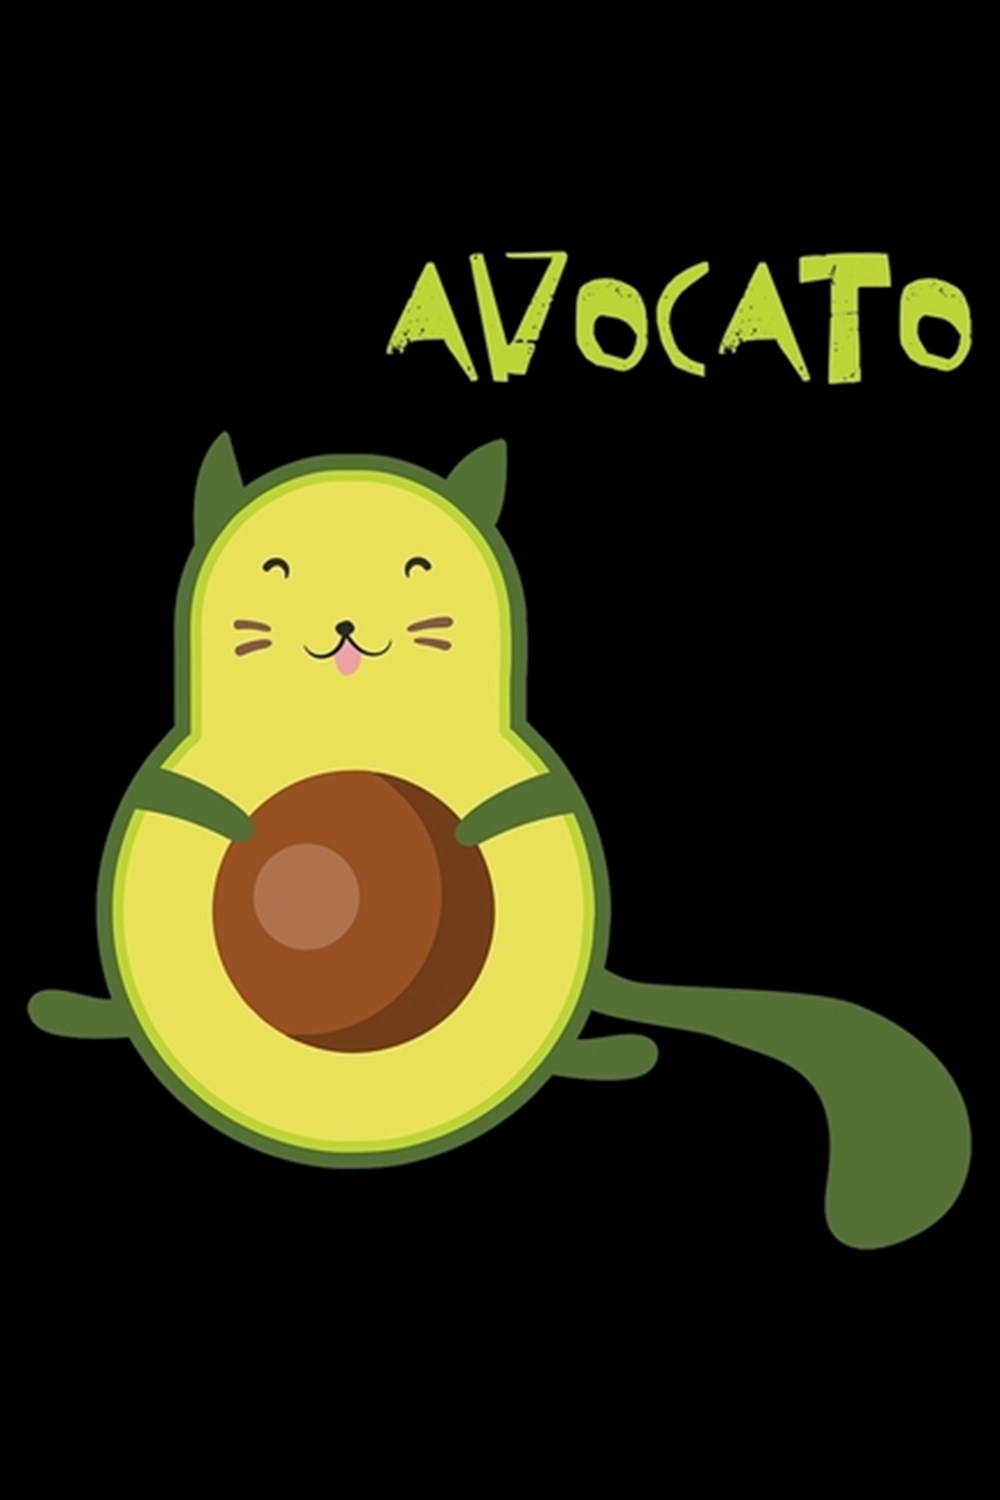 Avocato Blank Cookbook Journal to Write in Recipes and Notes to Create Your Own Family Favorite Coll